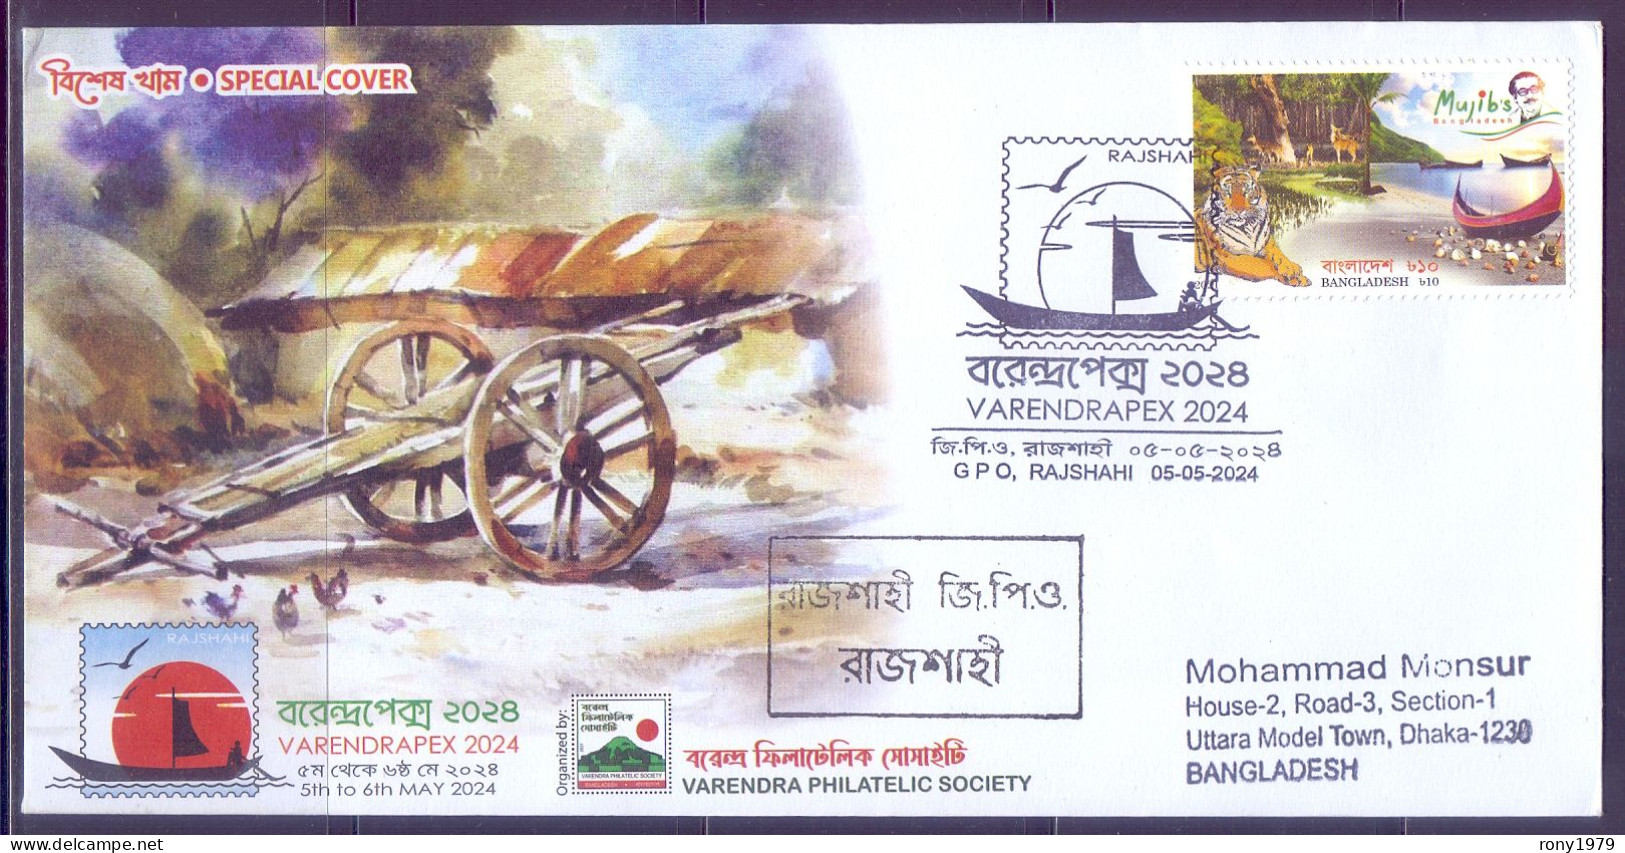 Bangladesh 2024 Varendrapex Stamp Exhibition Wheelbarrow Rooster Village Hut Sail Boat REG Special Cover Pictorial PM-1 - Philatelic Exhibitions